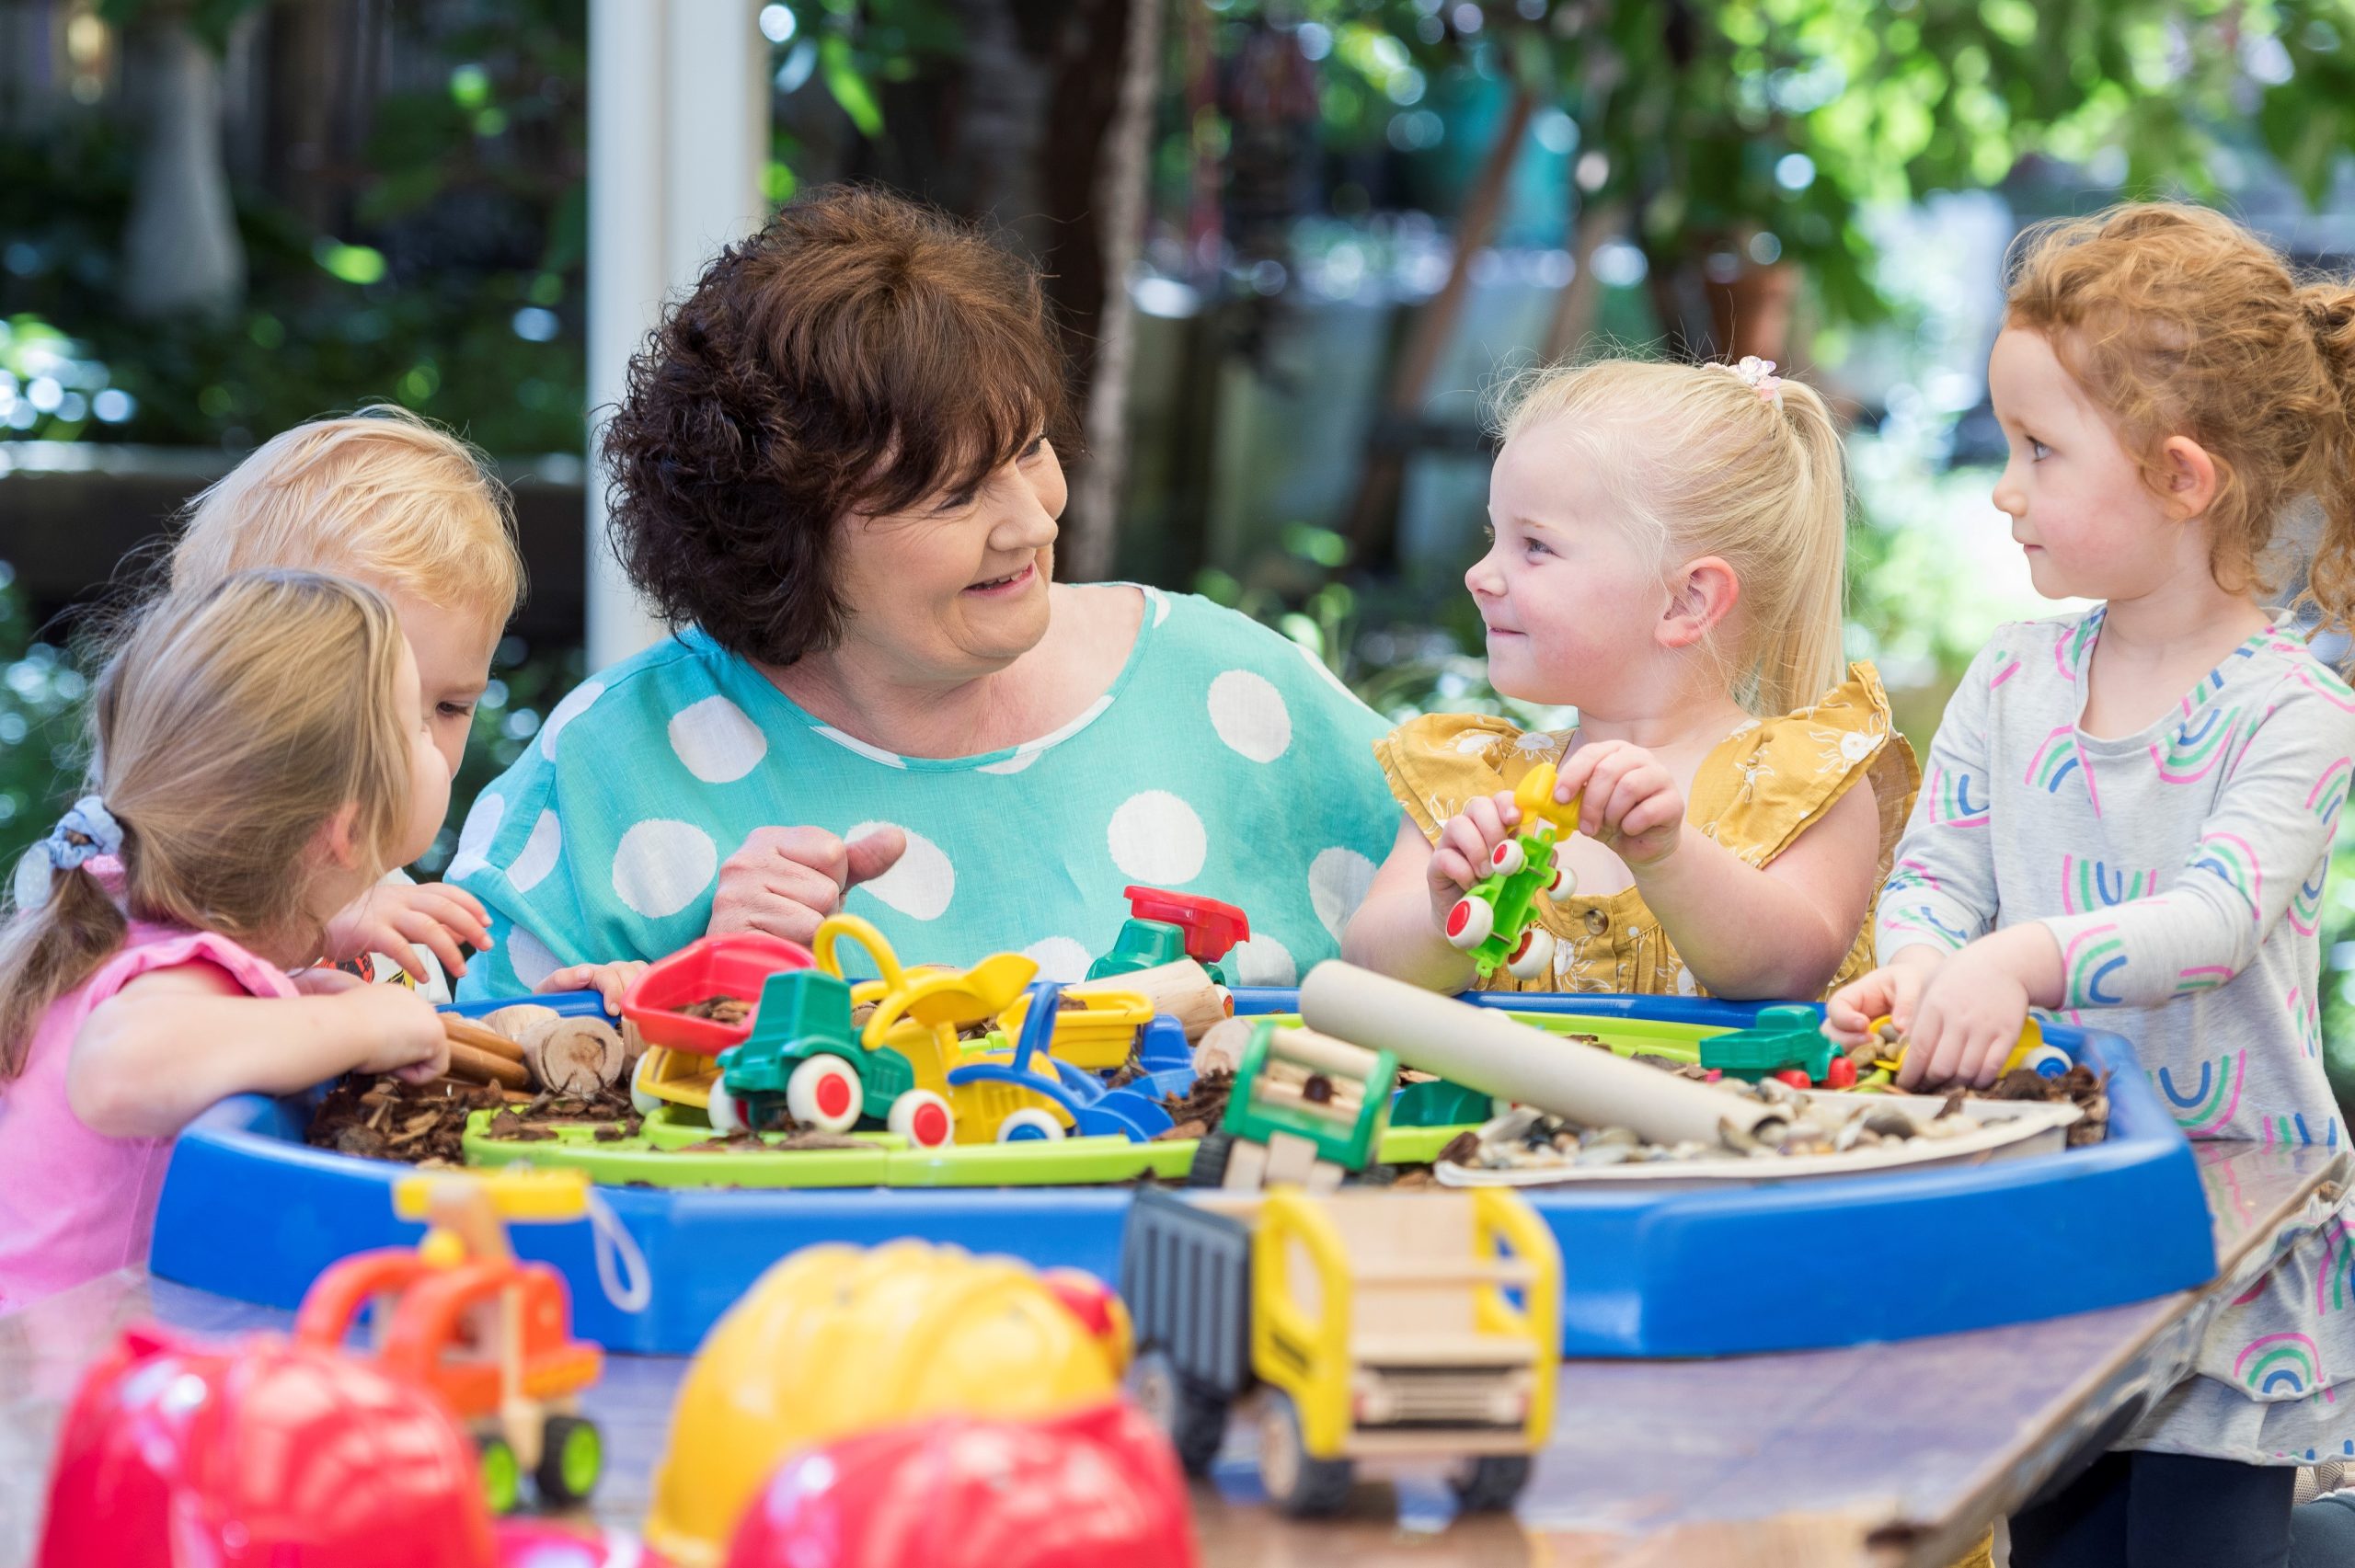 Lady with 4 young children around her doing an activity on a table